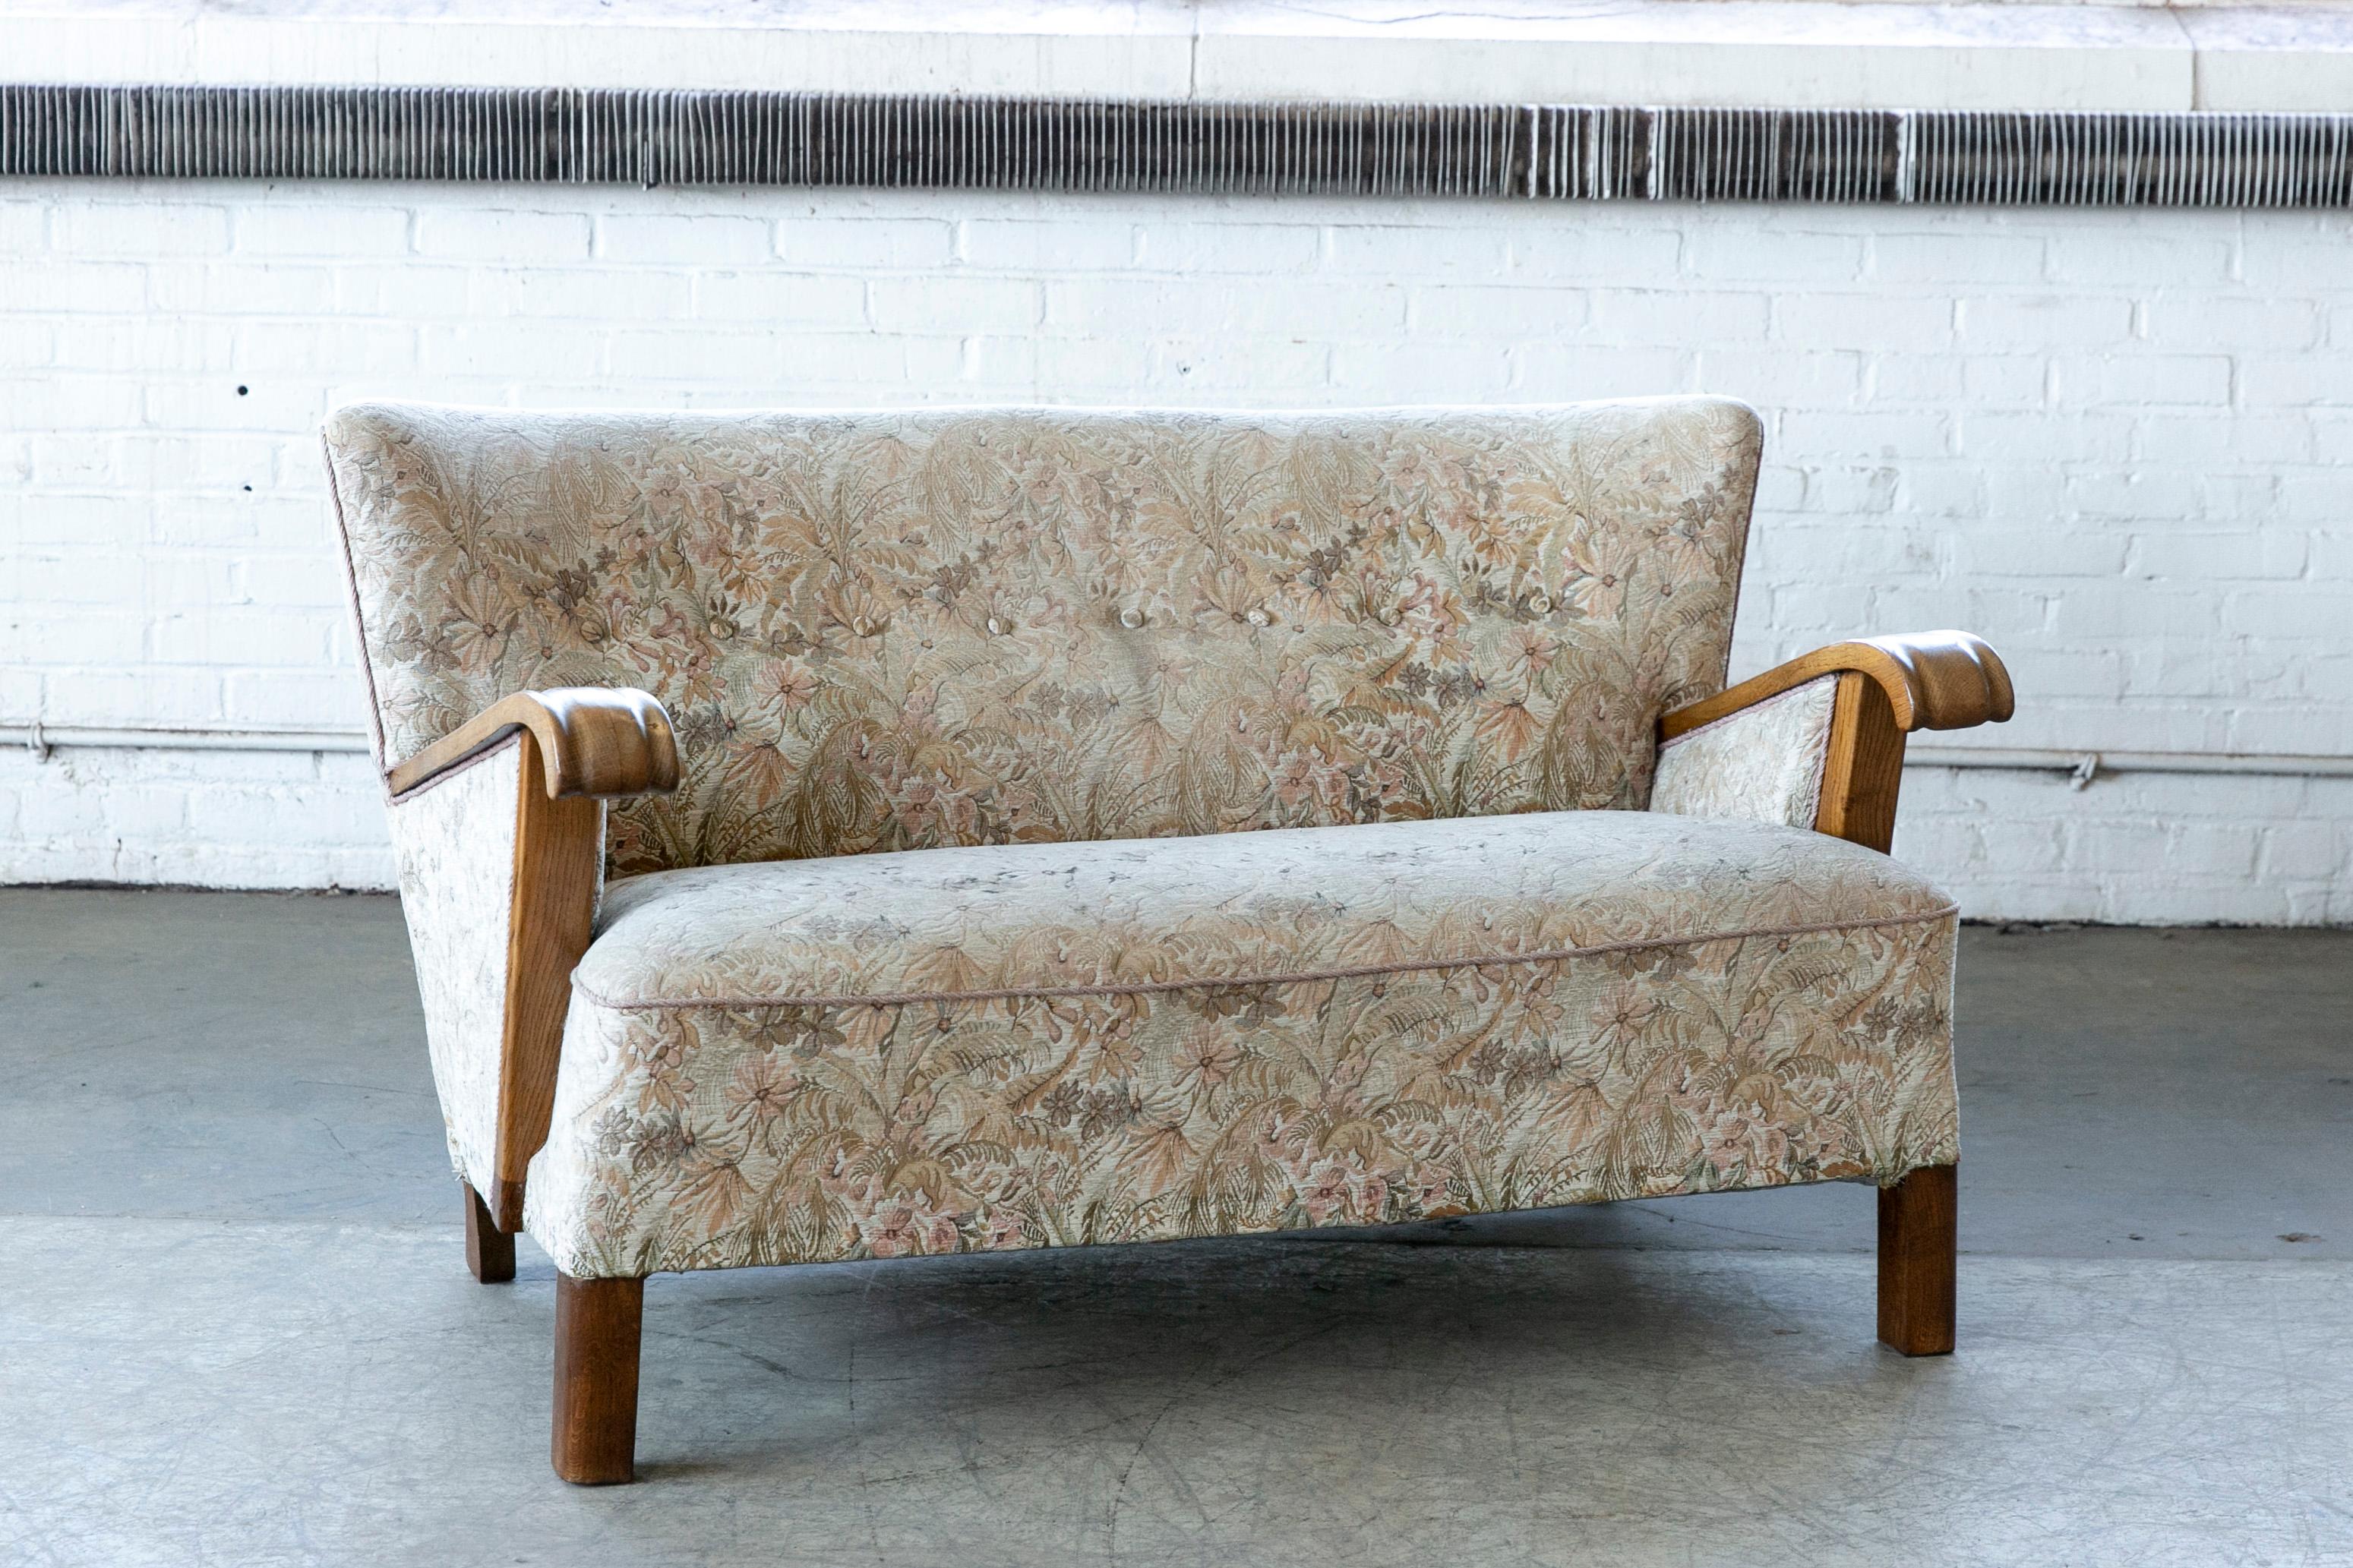 Elegant and charming easy style from the 1940s very typical of Fritz Hansen's design style both in terms of legs and armrests leading many dealers in Denmark to believe the sofa is indeed by Fritz Hansen. But nobody knows for sure. These type of